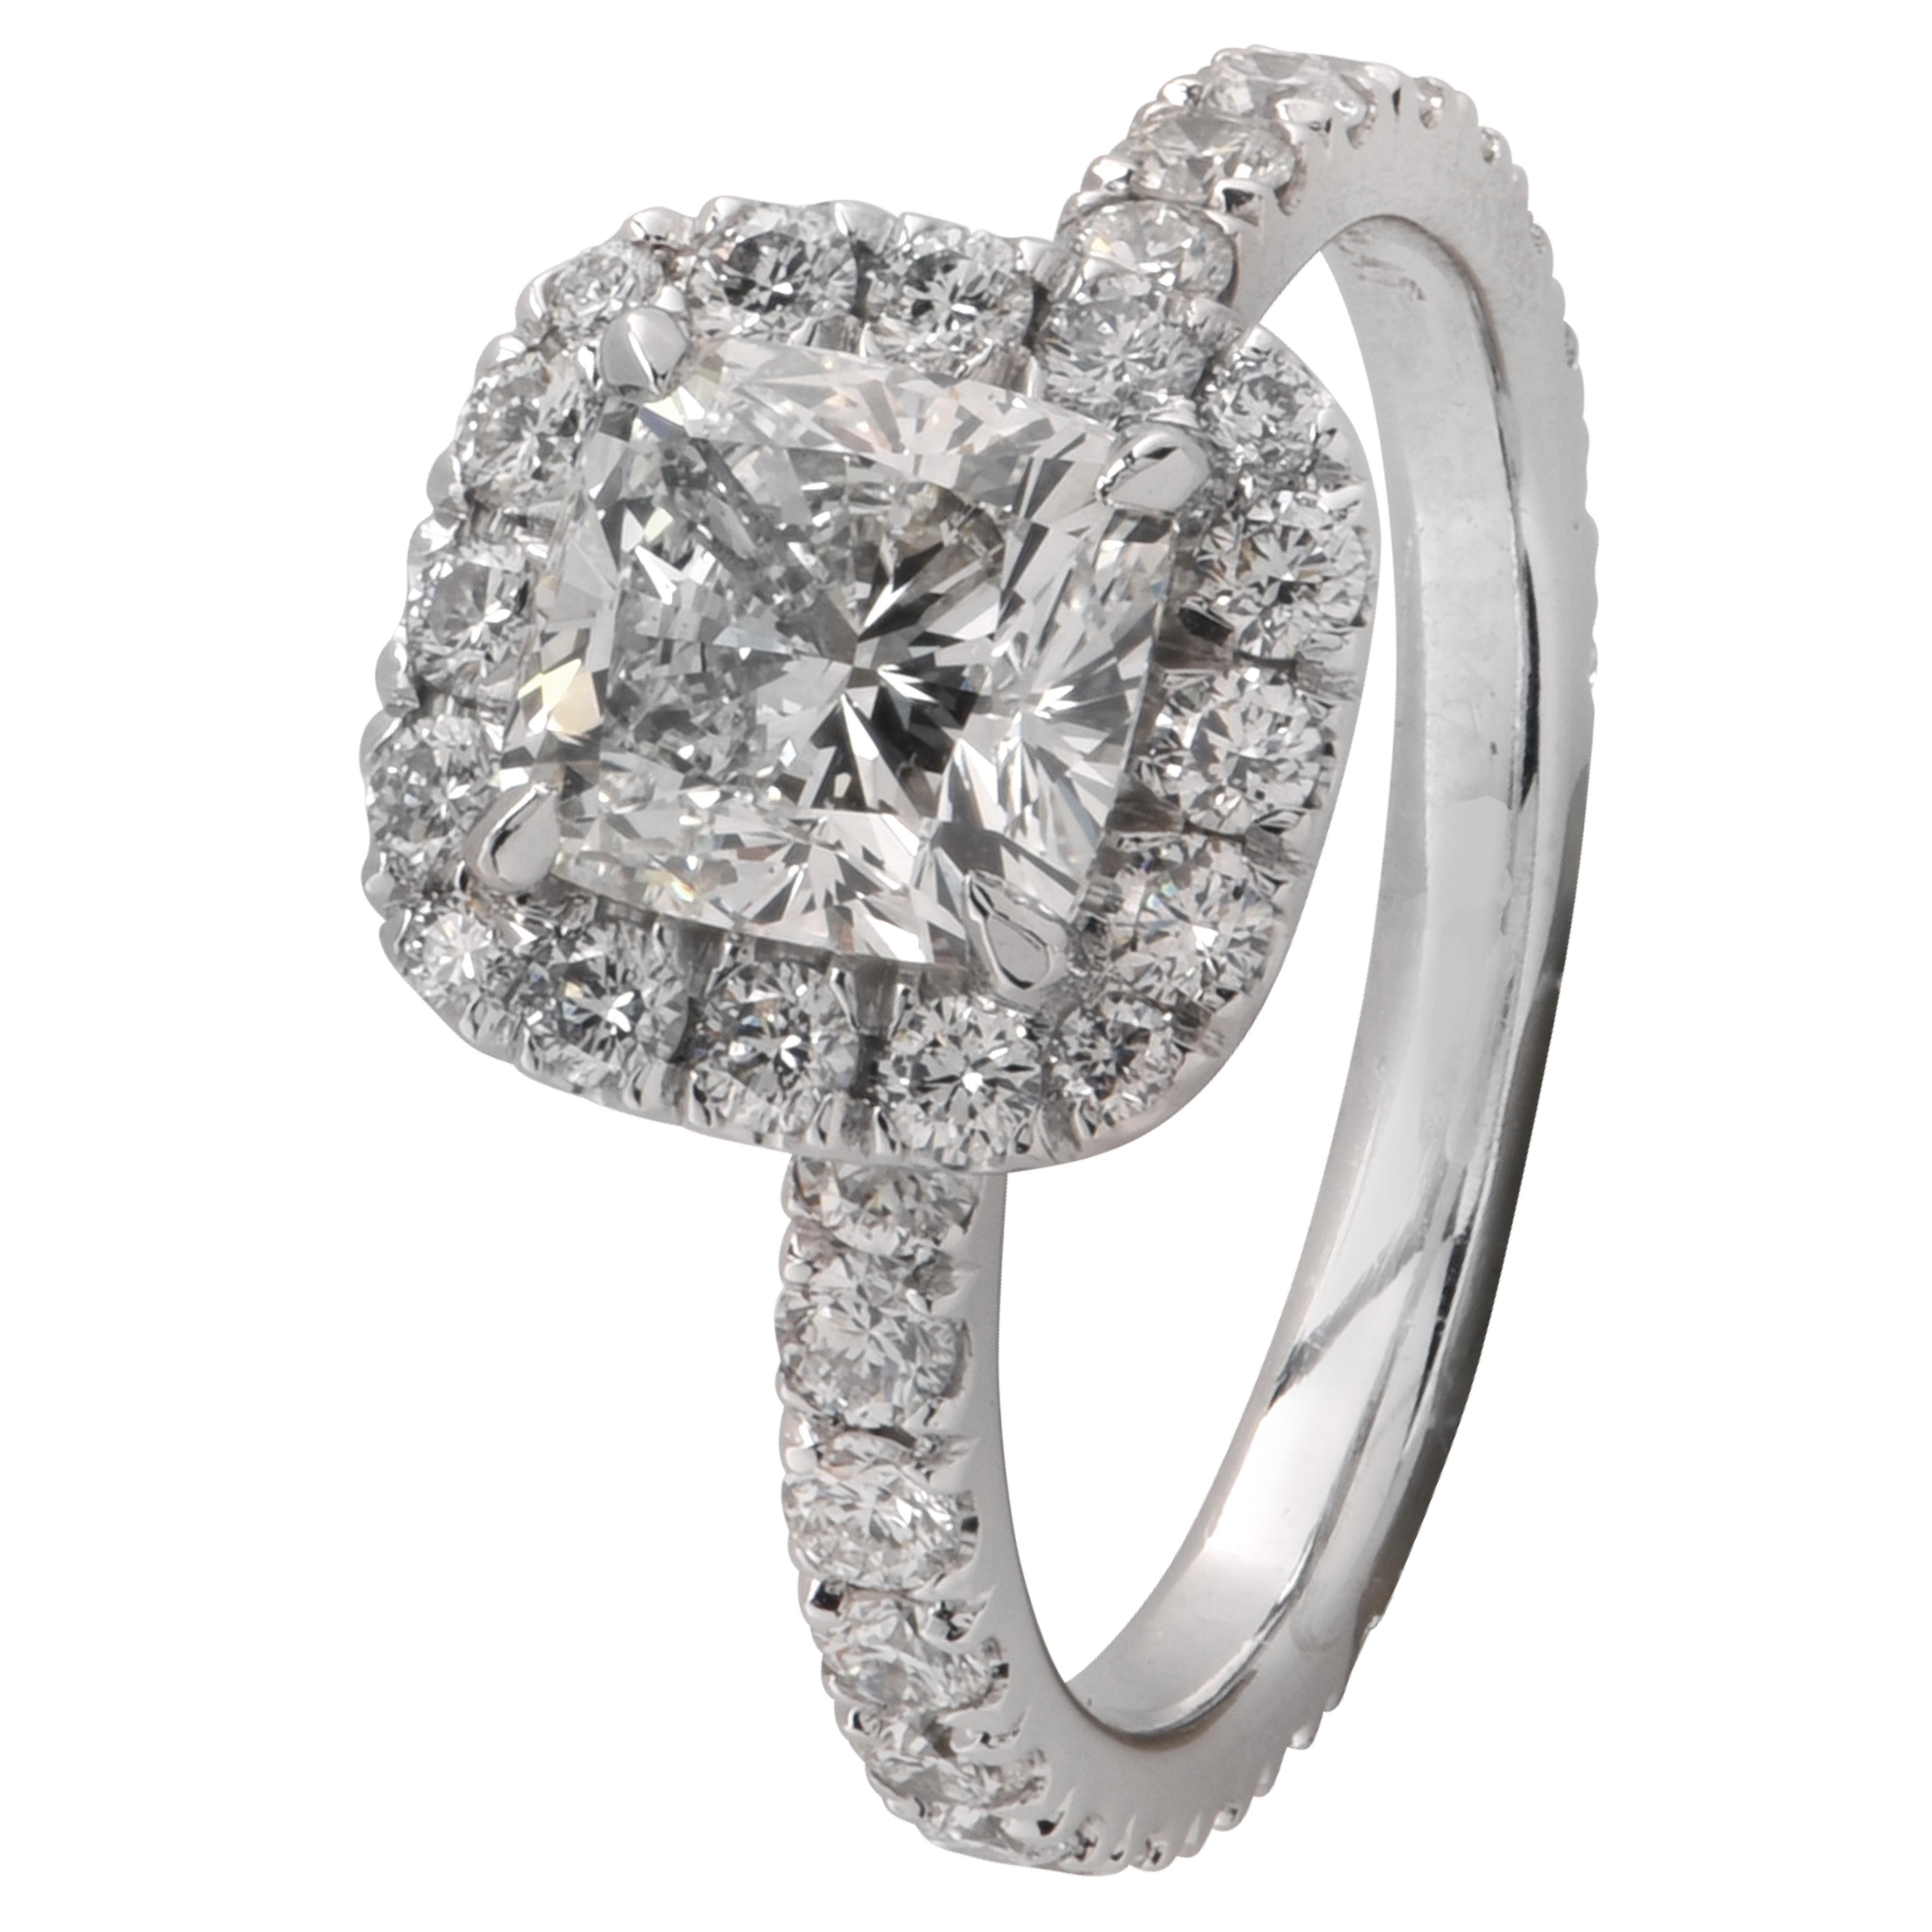 Spectacular engagement ring, custom made in platinum, showcasing a GIA certified cushion cut diamond weighing 1.52 carats, H color, VS1 clarity, halo set with 36 round brilliant cut diamonds weighing approximately .96 carats total, G color VS